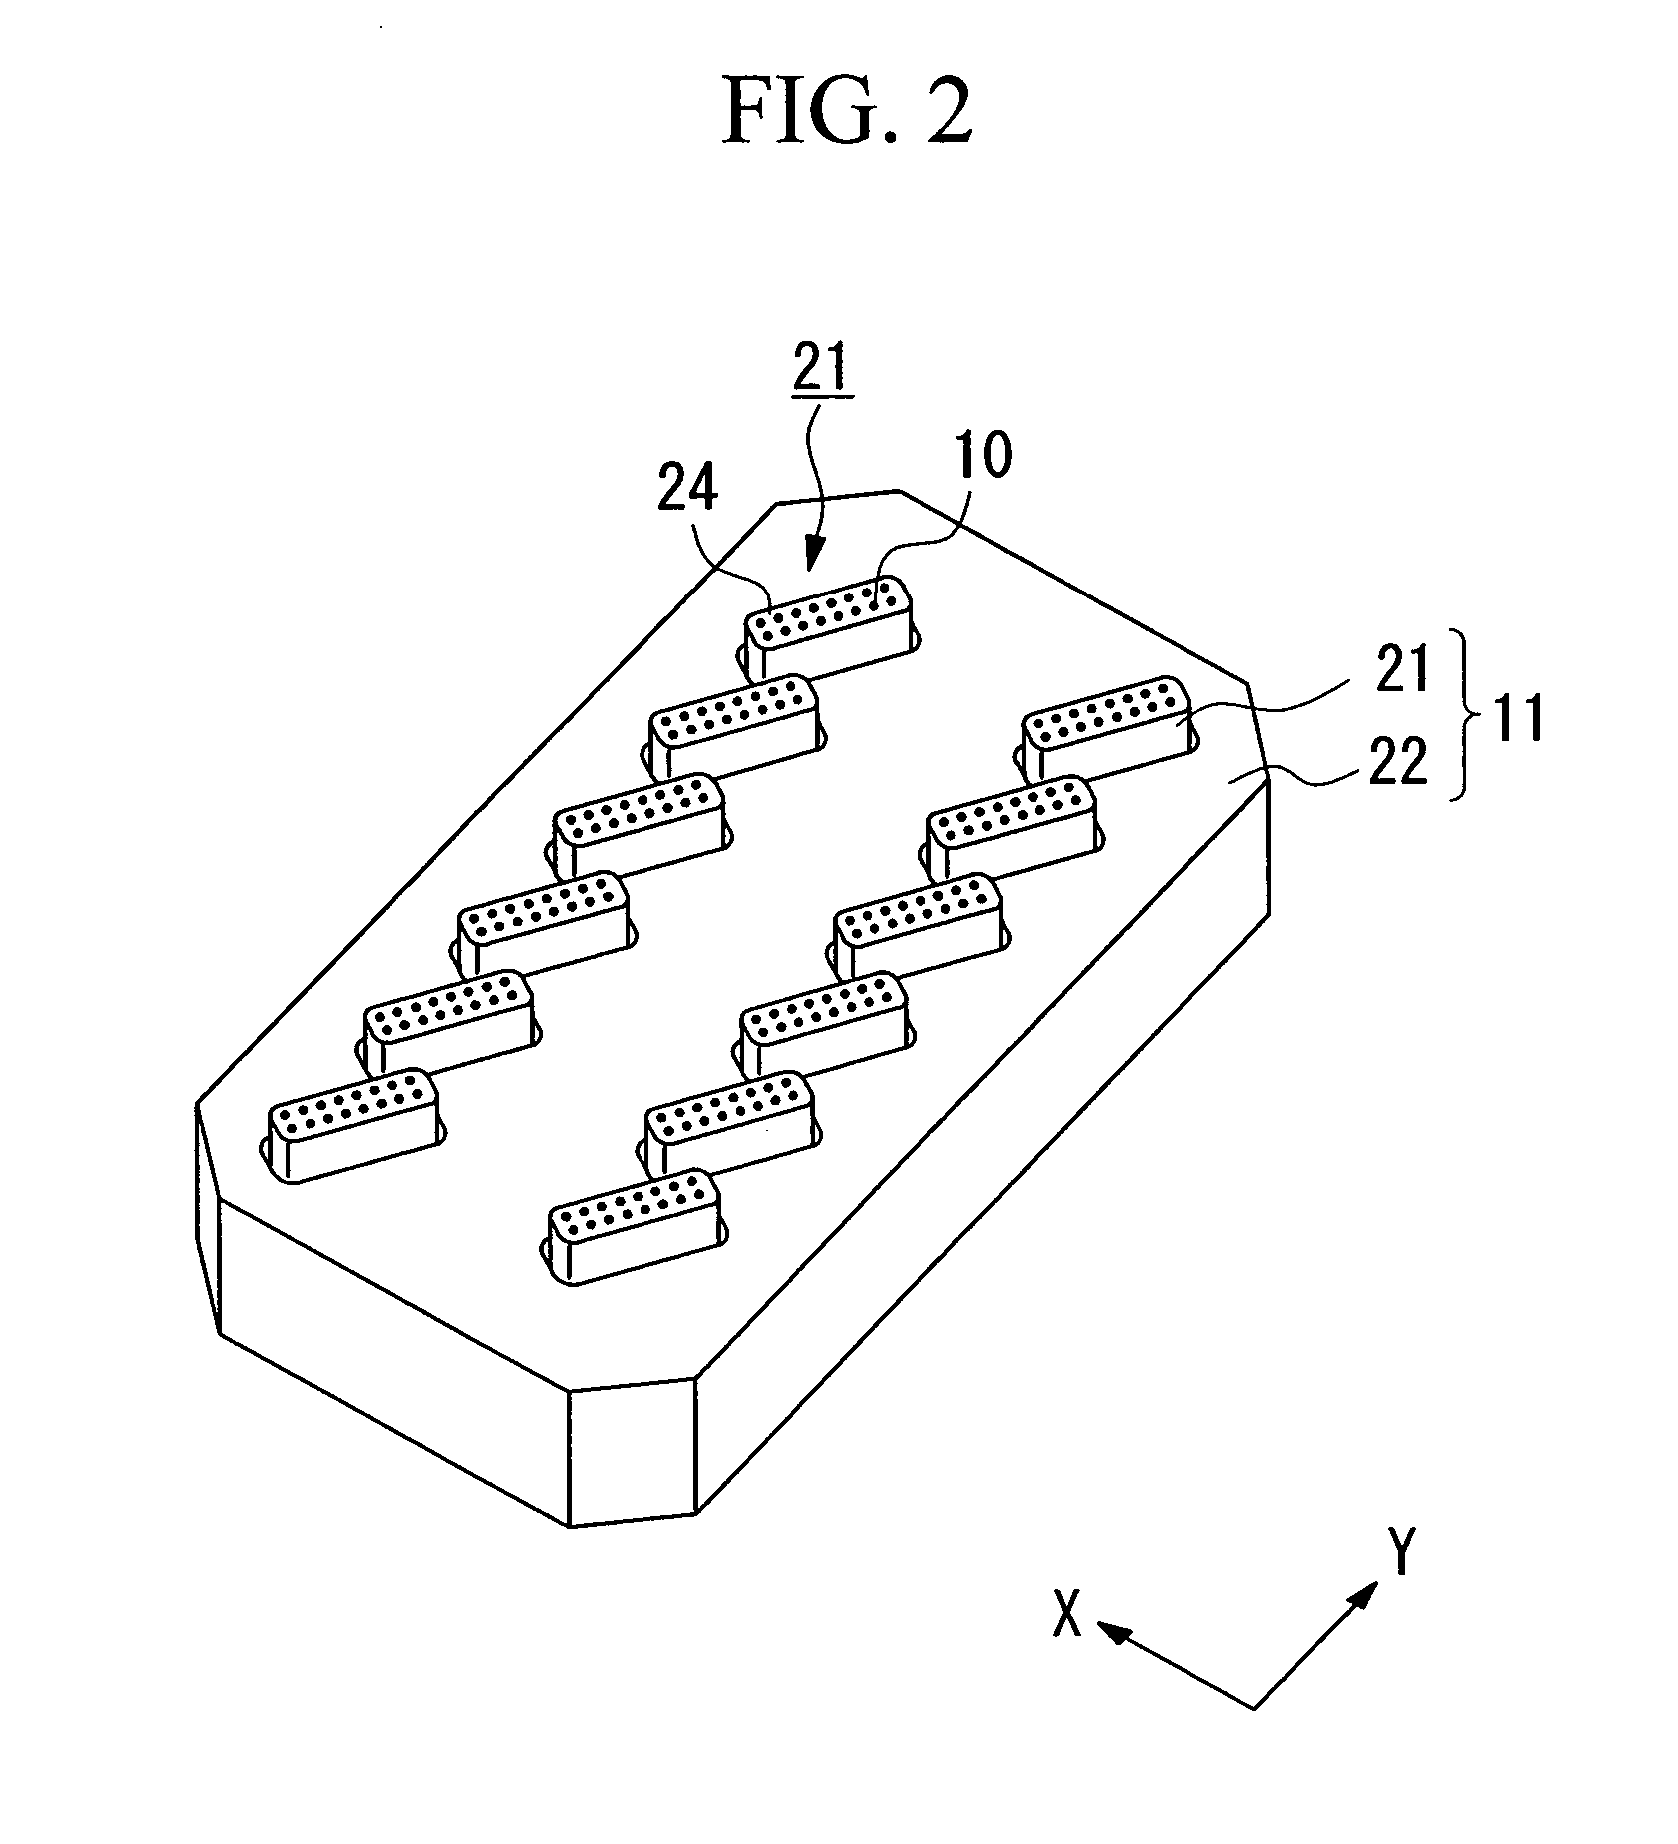 Method of manufacturing a device, device, and electronic apparatus